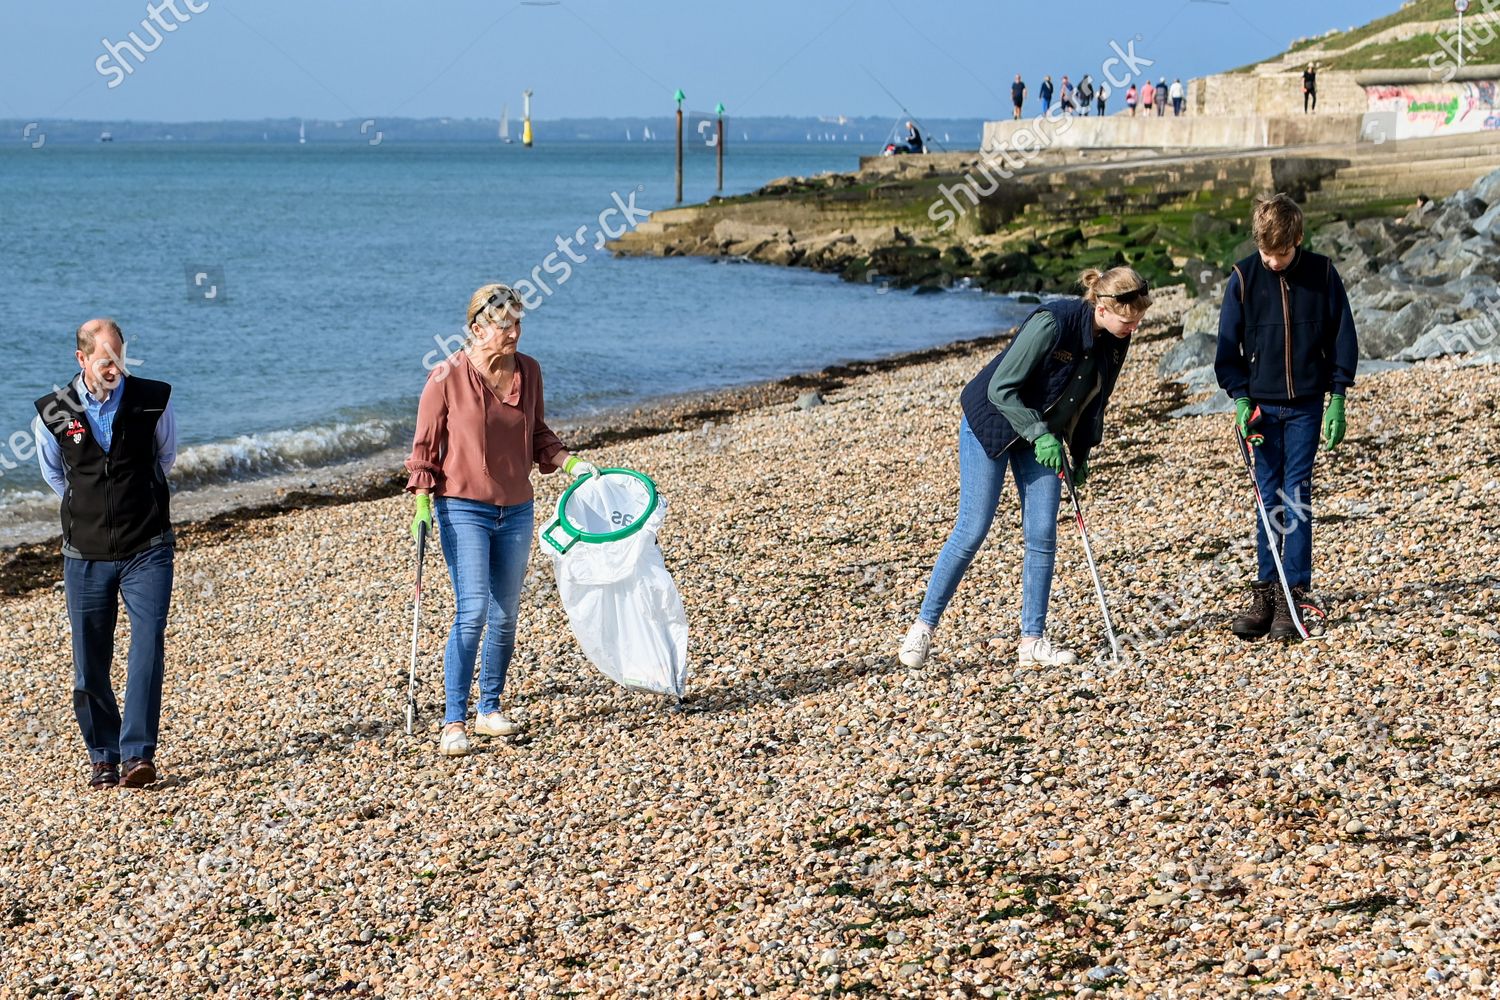 prince-edward-and-sophie-countess-of-wessex-great-british-beach-clean-southsea-beach-portsmouth-uk-shutterstock-editorial-10782998aw.jpg